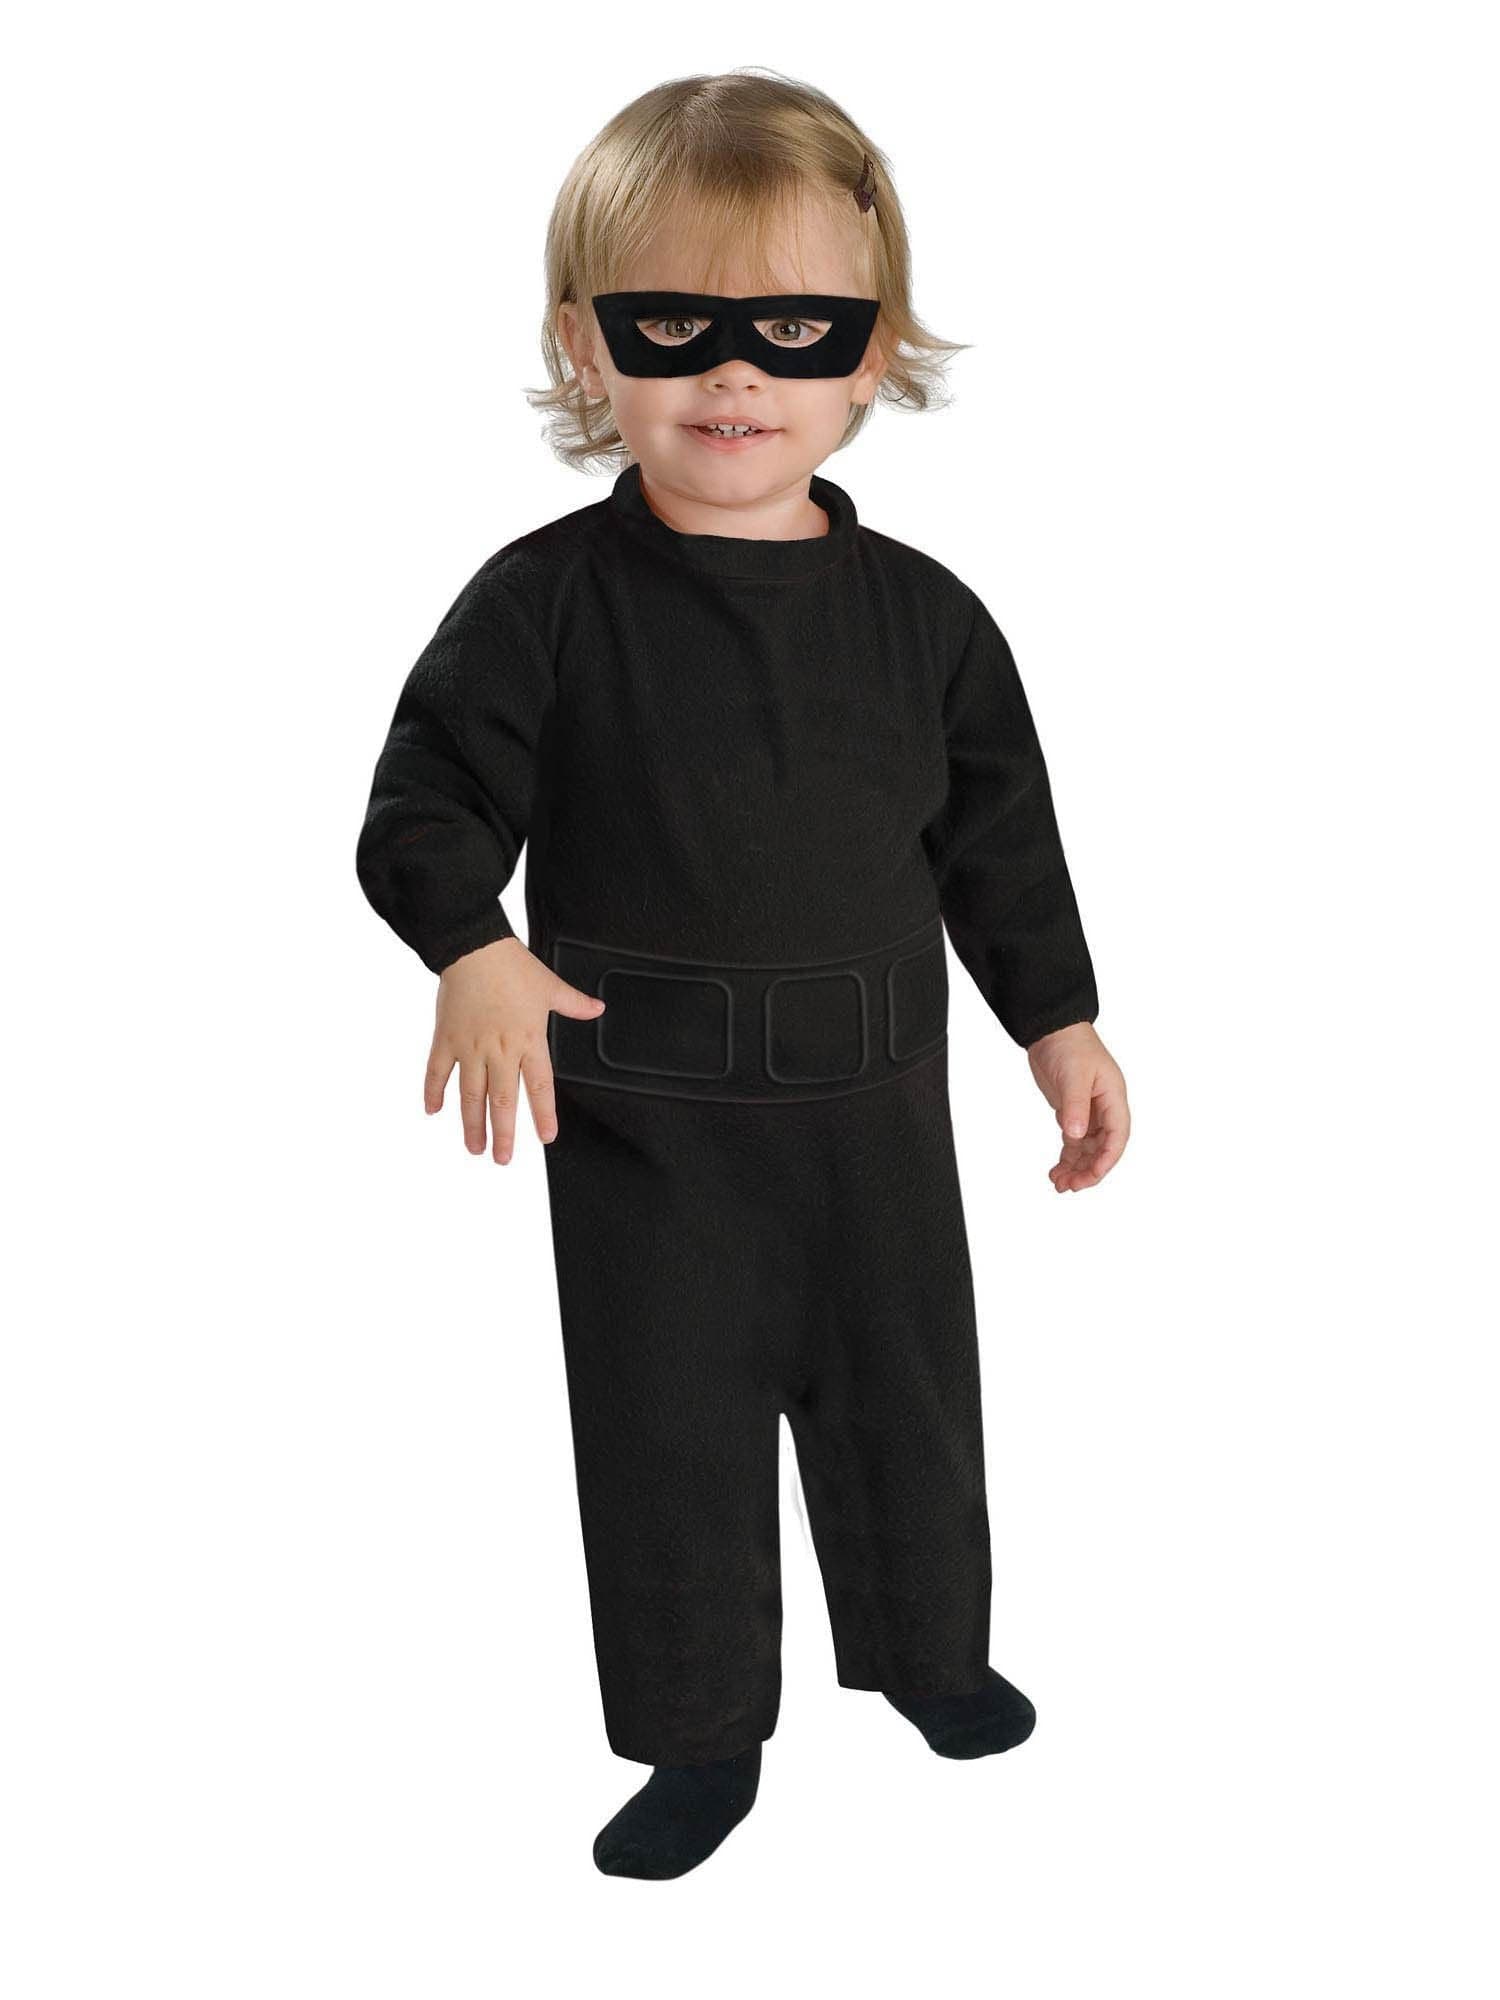 Baby/Toddler DC Comics Catwoman Costume - costumes.com